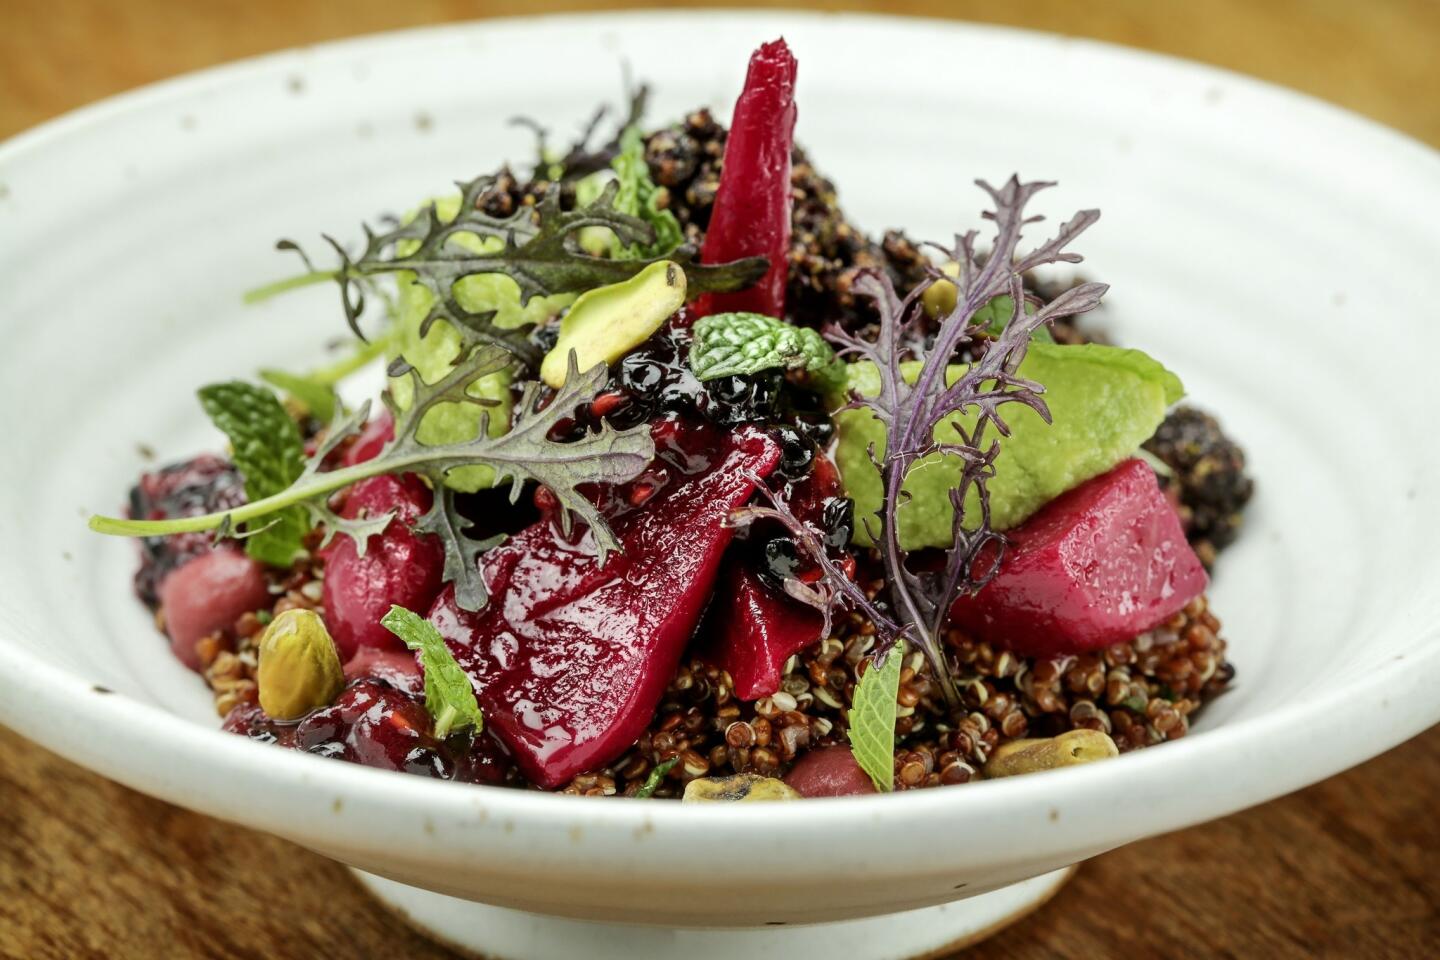 Roasted beets and purple quinoa in a rustic pottery bowl, topped with herbs, crisply roasted pistachios, chunks of buttery Reed avocado and slightly unripe mashed berries. Rustic Canyon's menu reaches higher under chef Jeremy Fox.